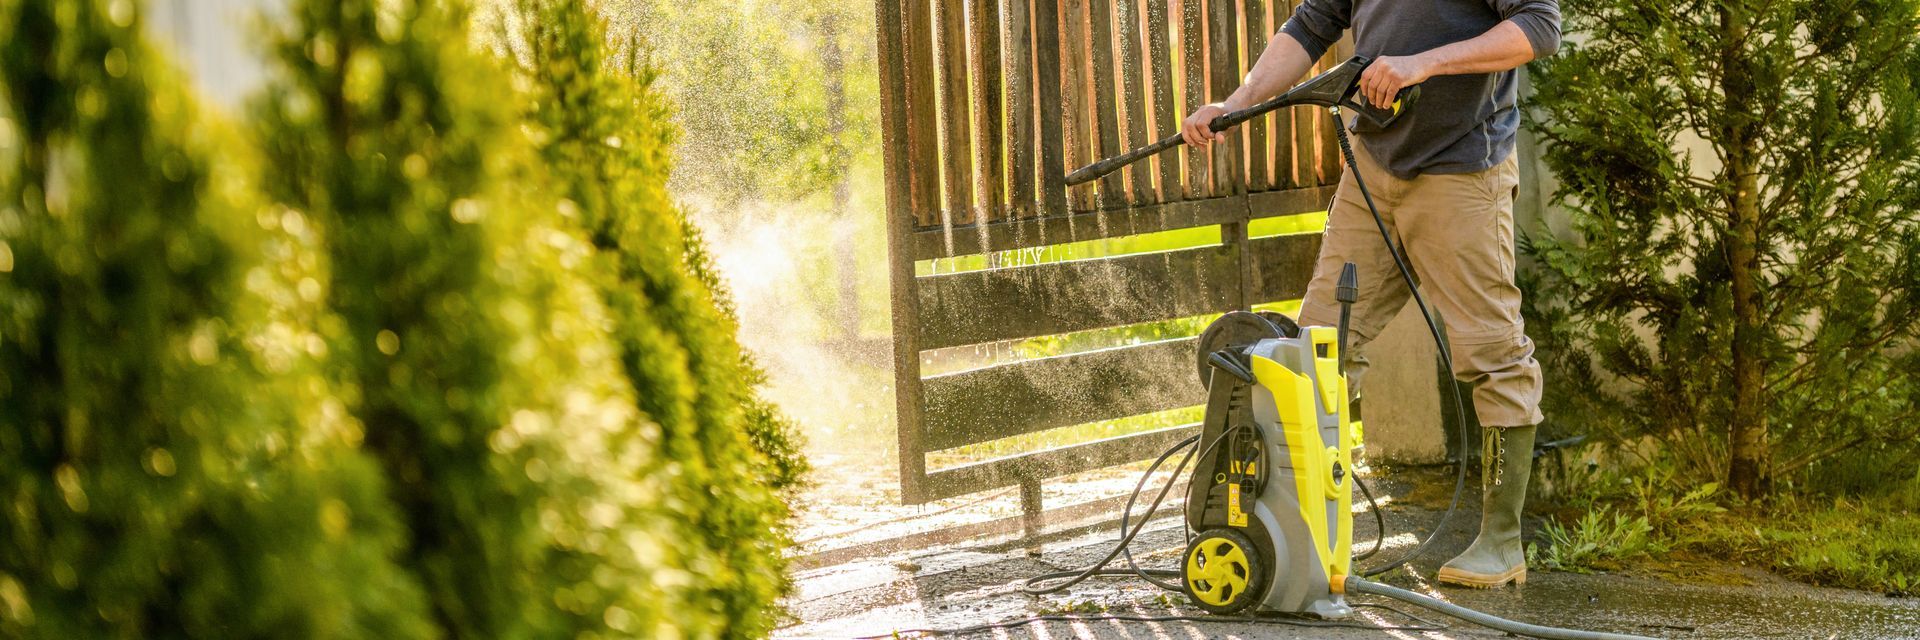 man cleaning the gate using pressure washer